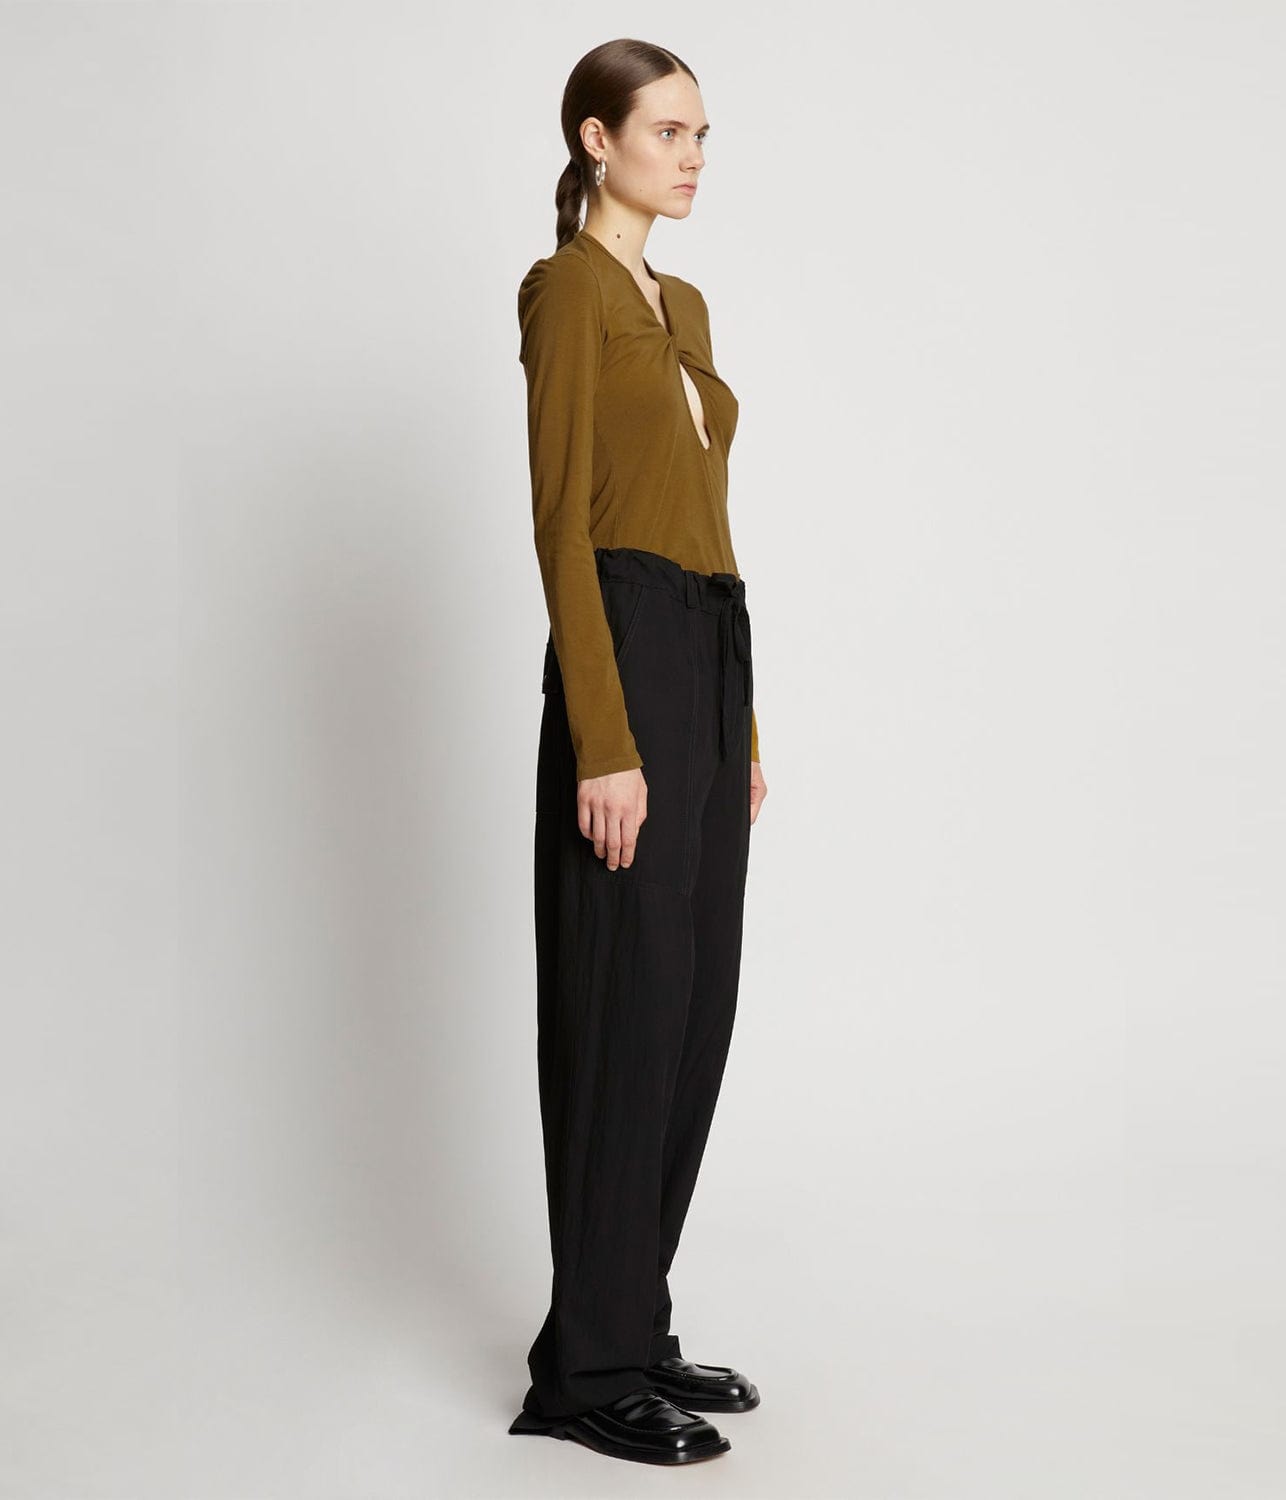 JERSEY KEYHOLE TOP-OLIVE | PROENZA SCHOULER WHITE LABEL |  PROENZA SCHOULER WHITE LABEL JERSEY KEYHOLE TOP-OLIVE